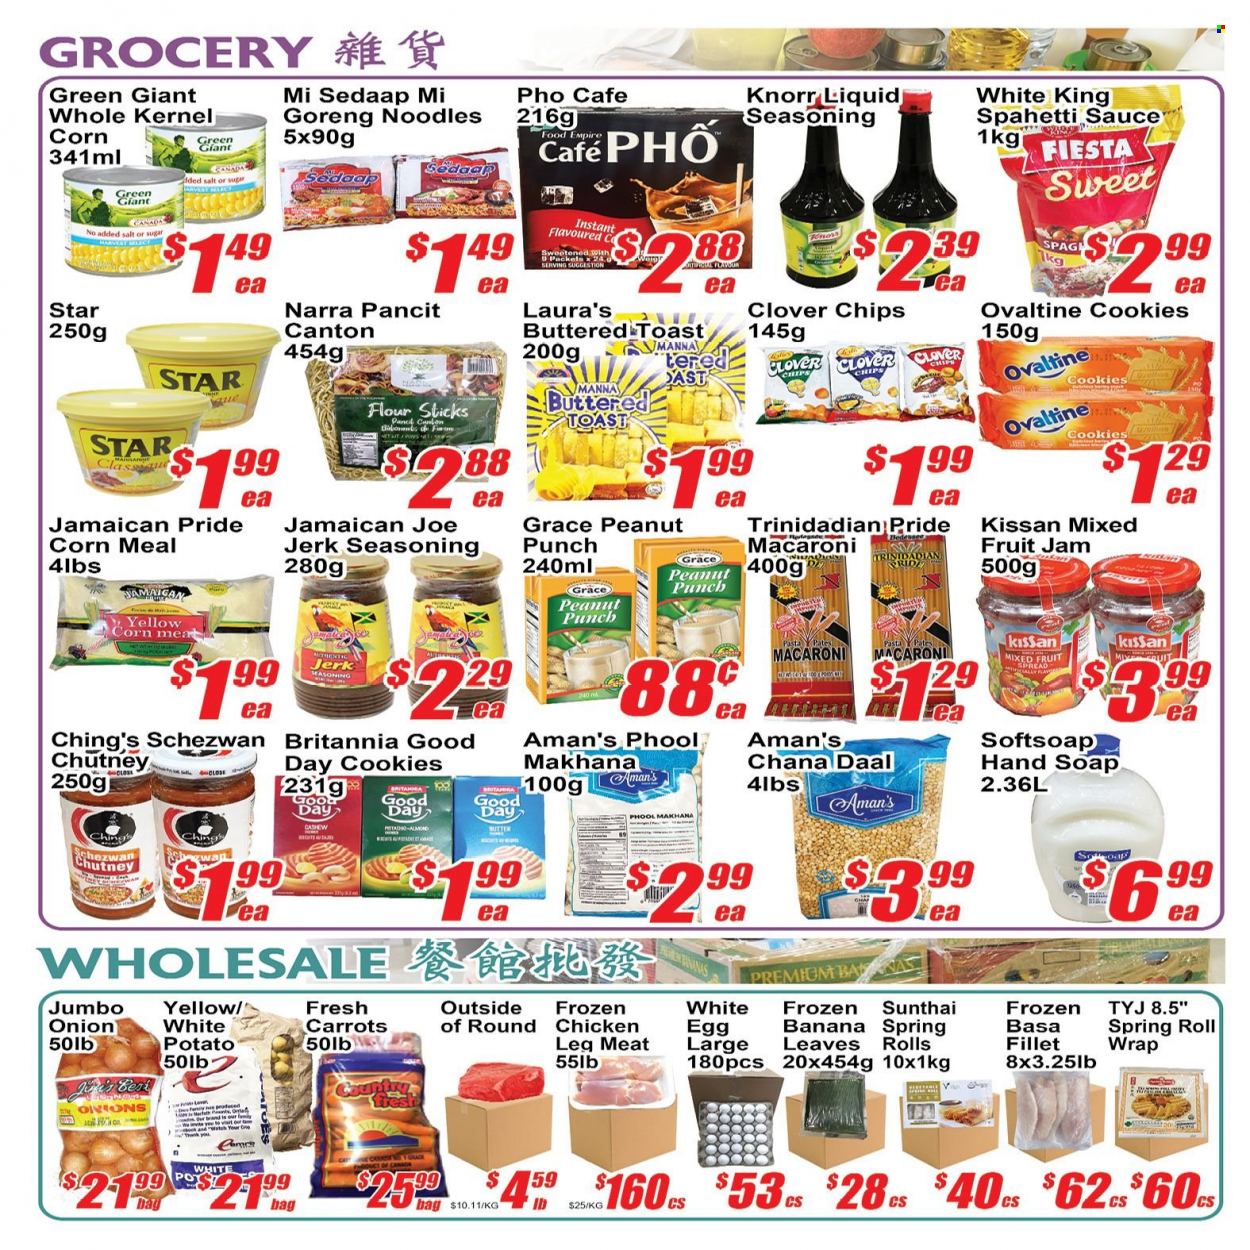 thumbnail - Jian Hing Supermarket Flyer - March 24, 2023 - March 30, 2023 - Sales products - carrots, corn, onion, bananas, macaroni, pasta, sauce, noodles, Clover, eggs, cookies, flour, sugar, chana dal, spice, chutney, fruit jam, punch, chicken legs, chicken, Knorr. Page 2.